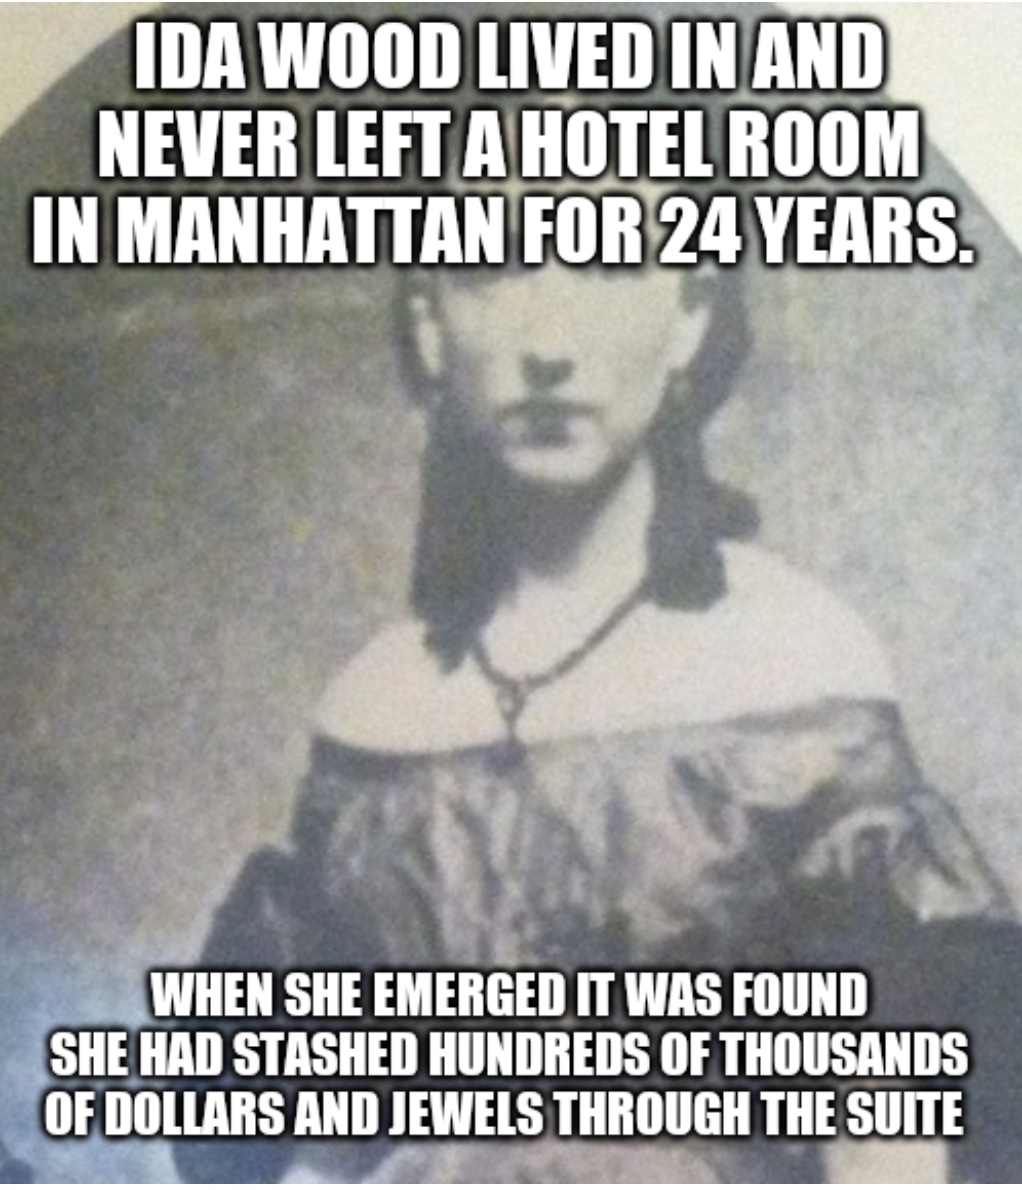 ida mayfield wood - Ida Wood Lived In And Never Left A Hotel Room In Manhattan For 24 Years. When She Emerged It Was Found She Had Stashed Hundreds Of Thousands Of Dollars And Jewels Through The Suite